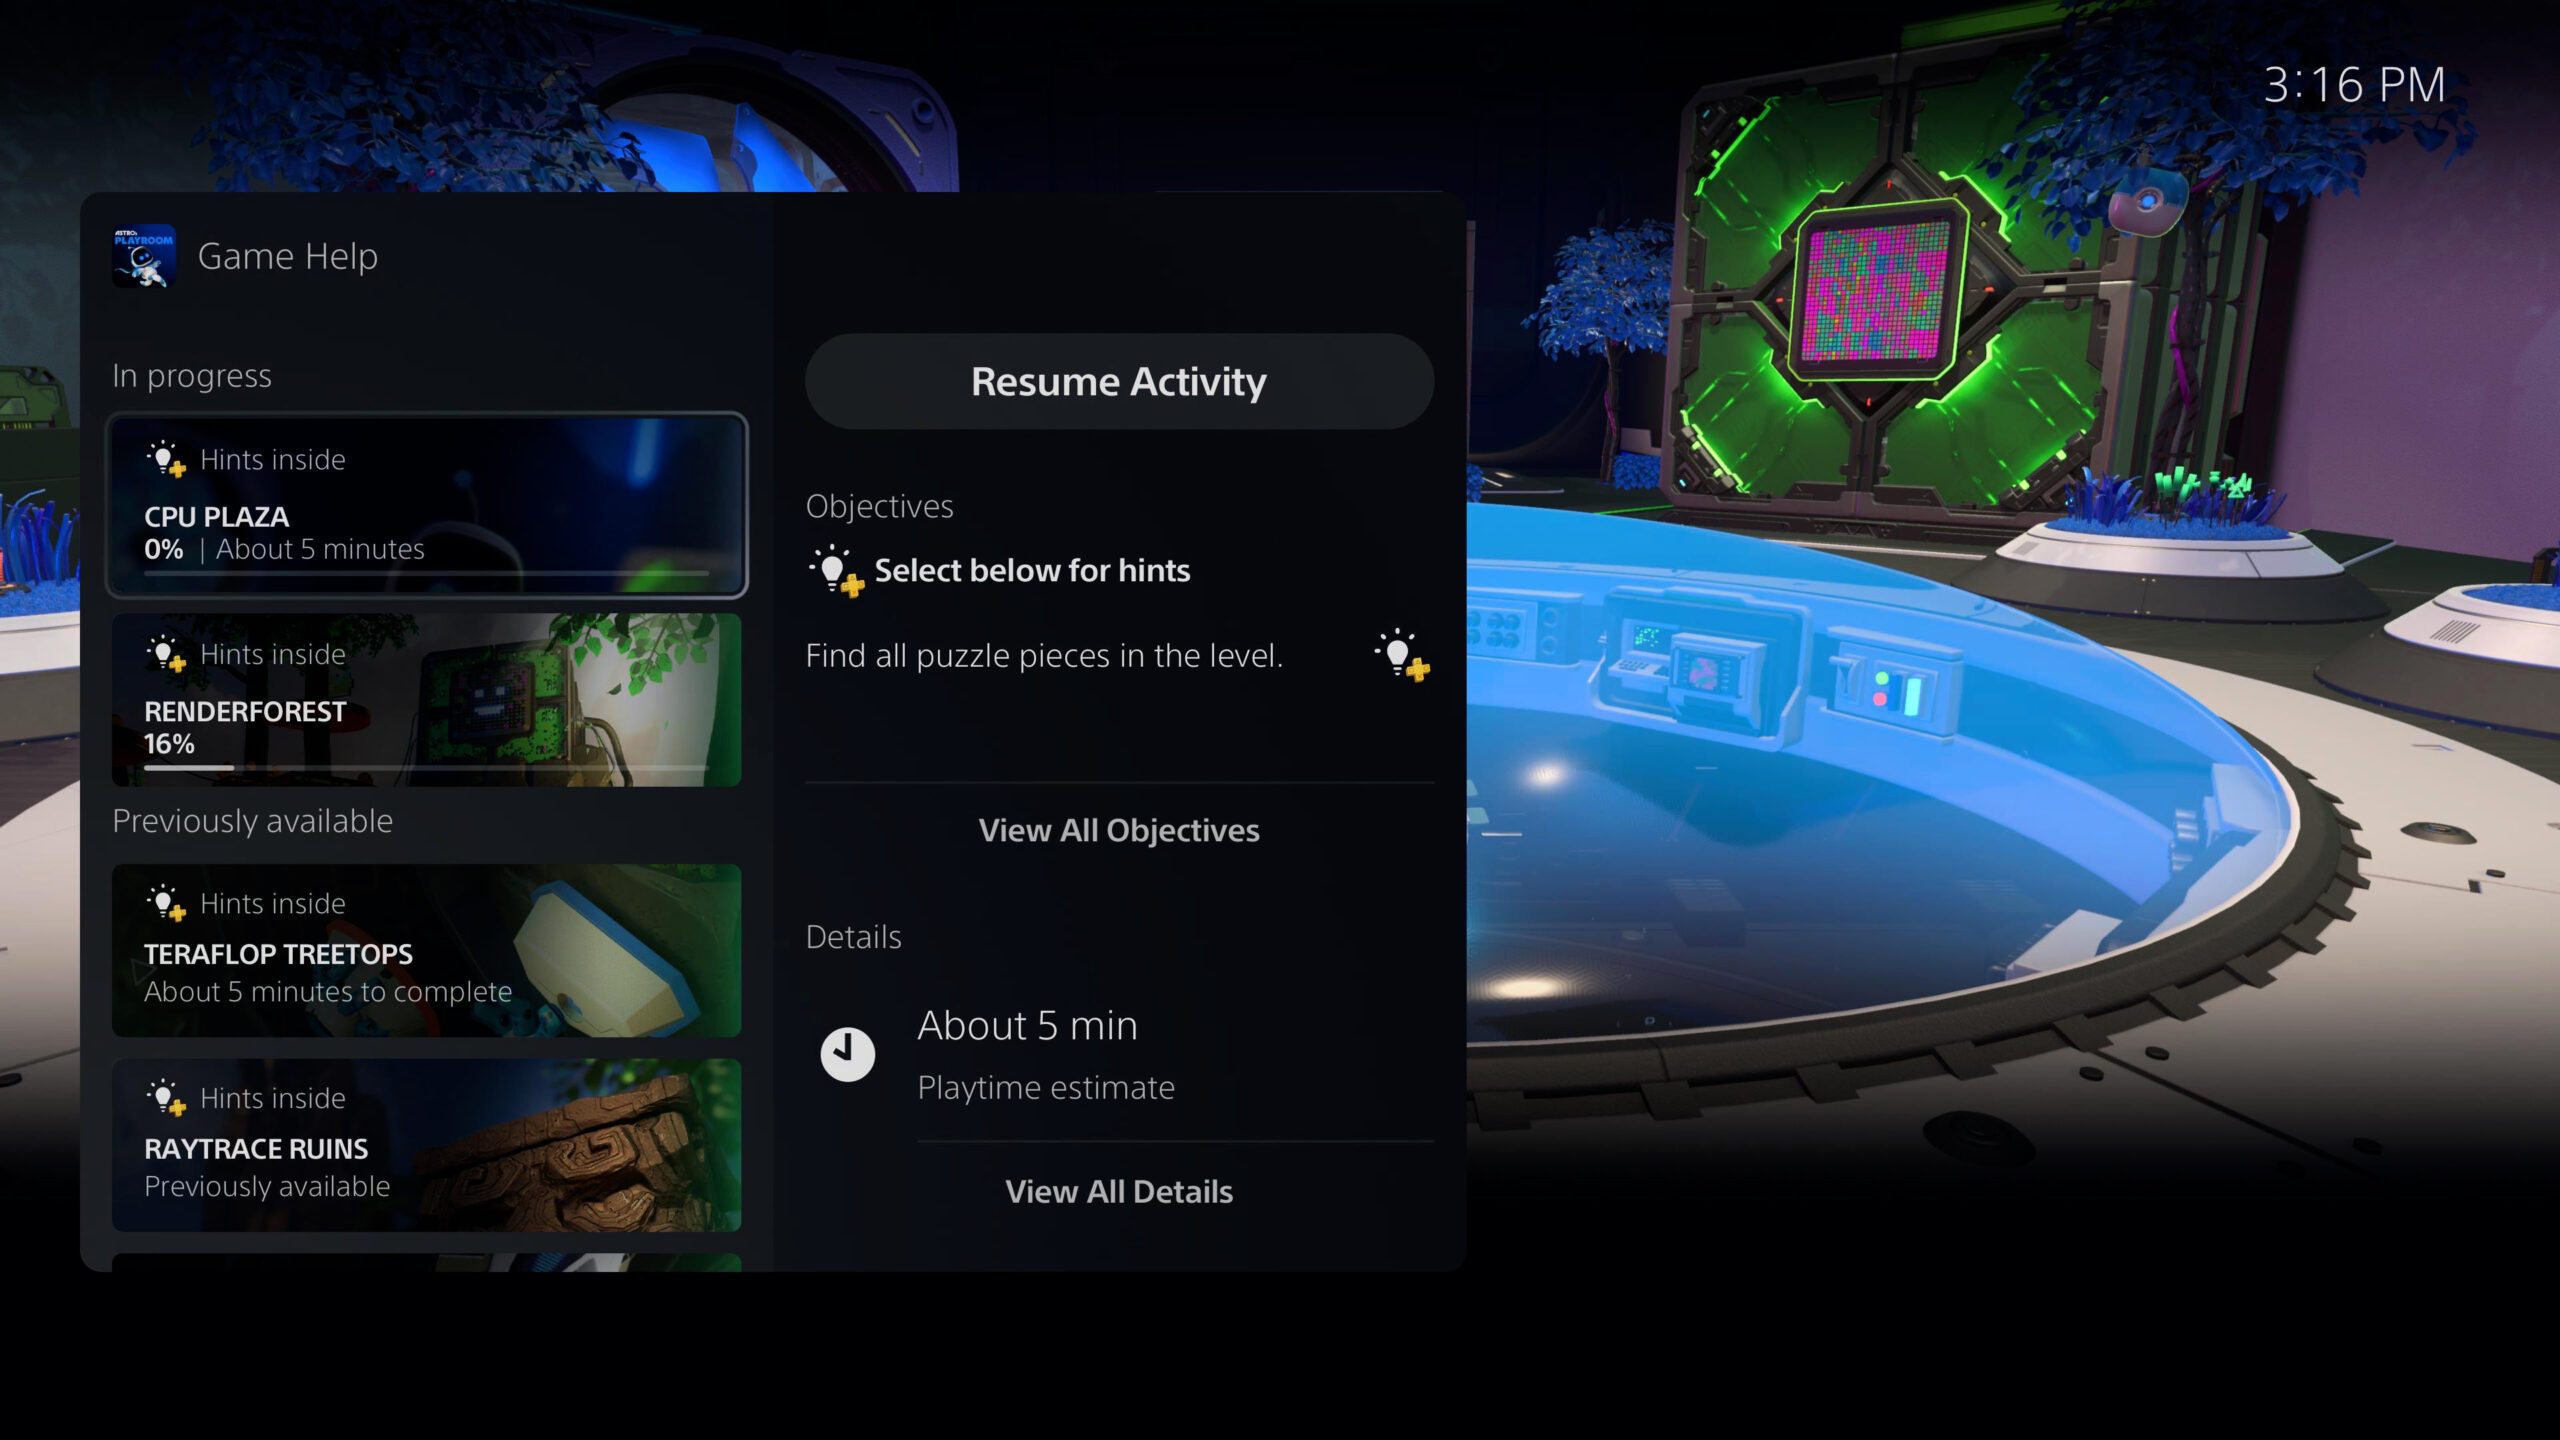 PS5 UI screenshot of Game Help card showing additional details of the activity